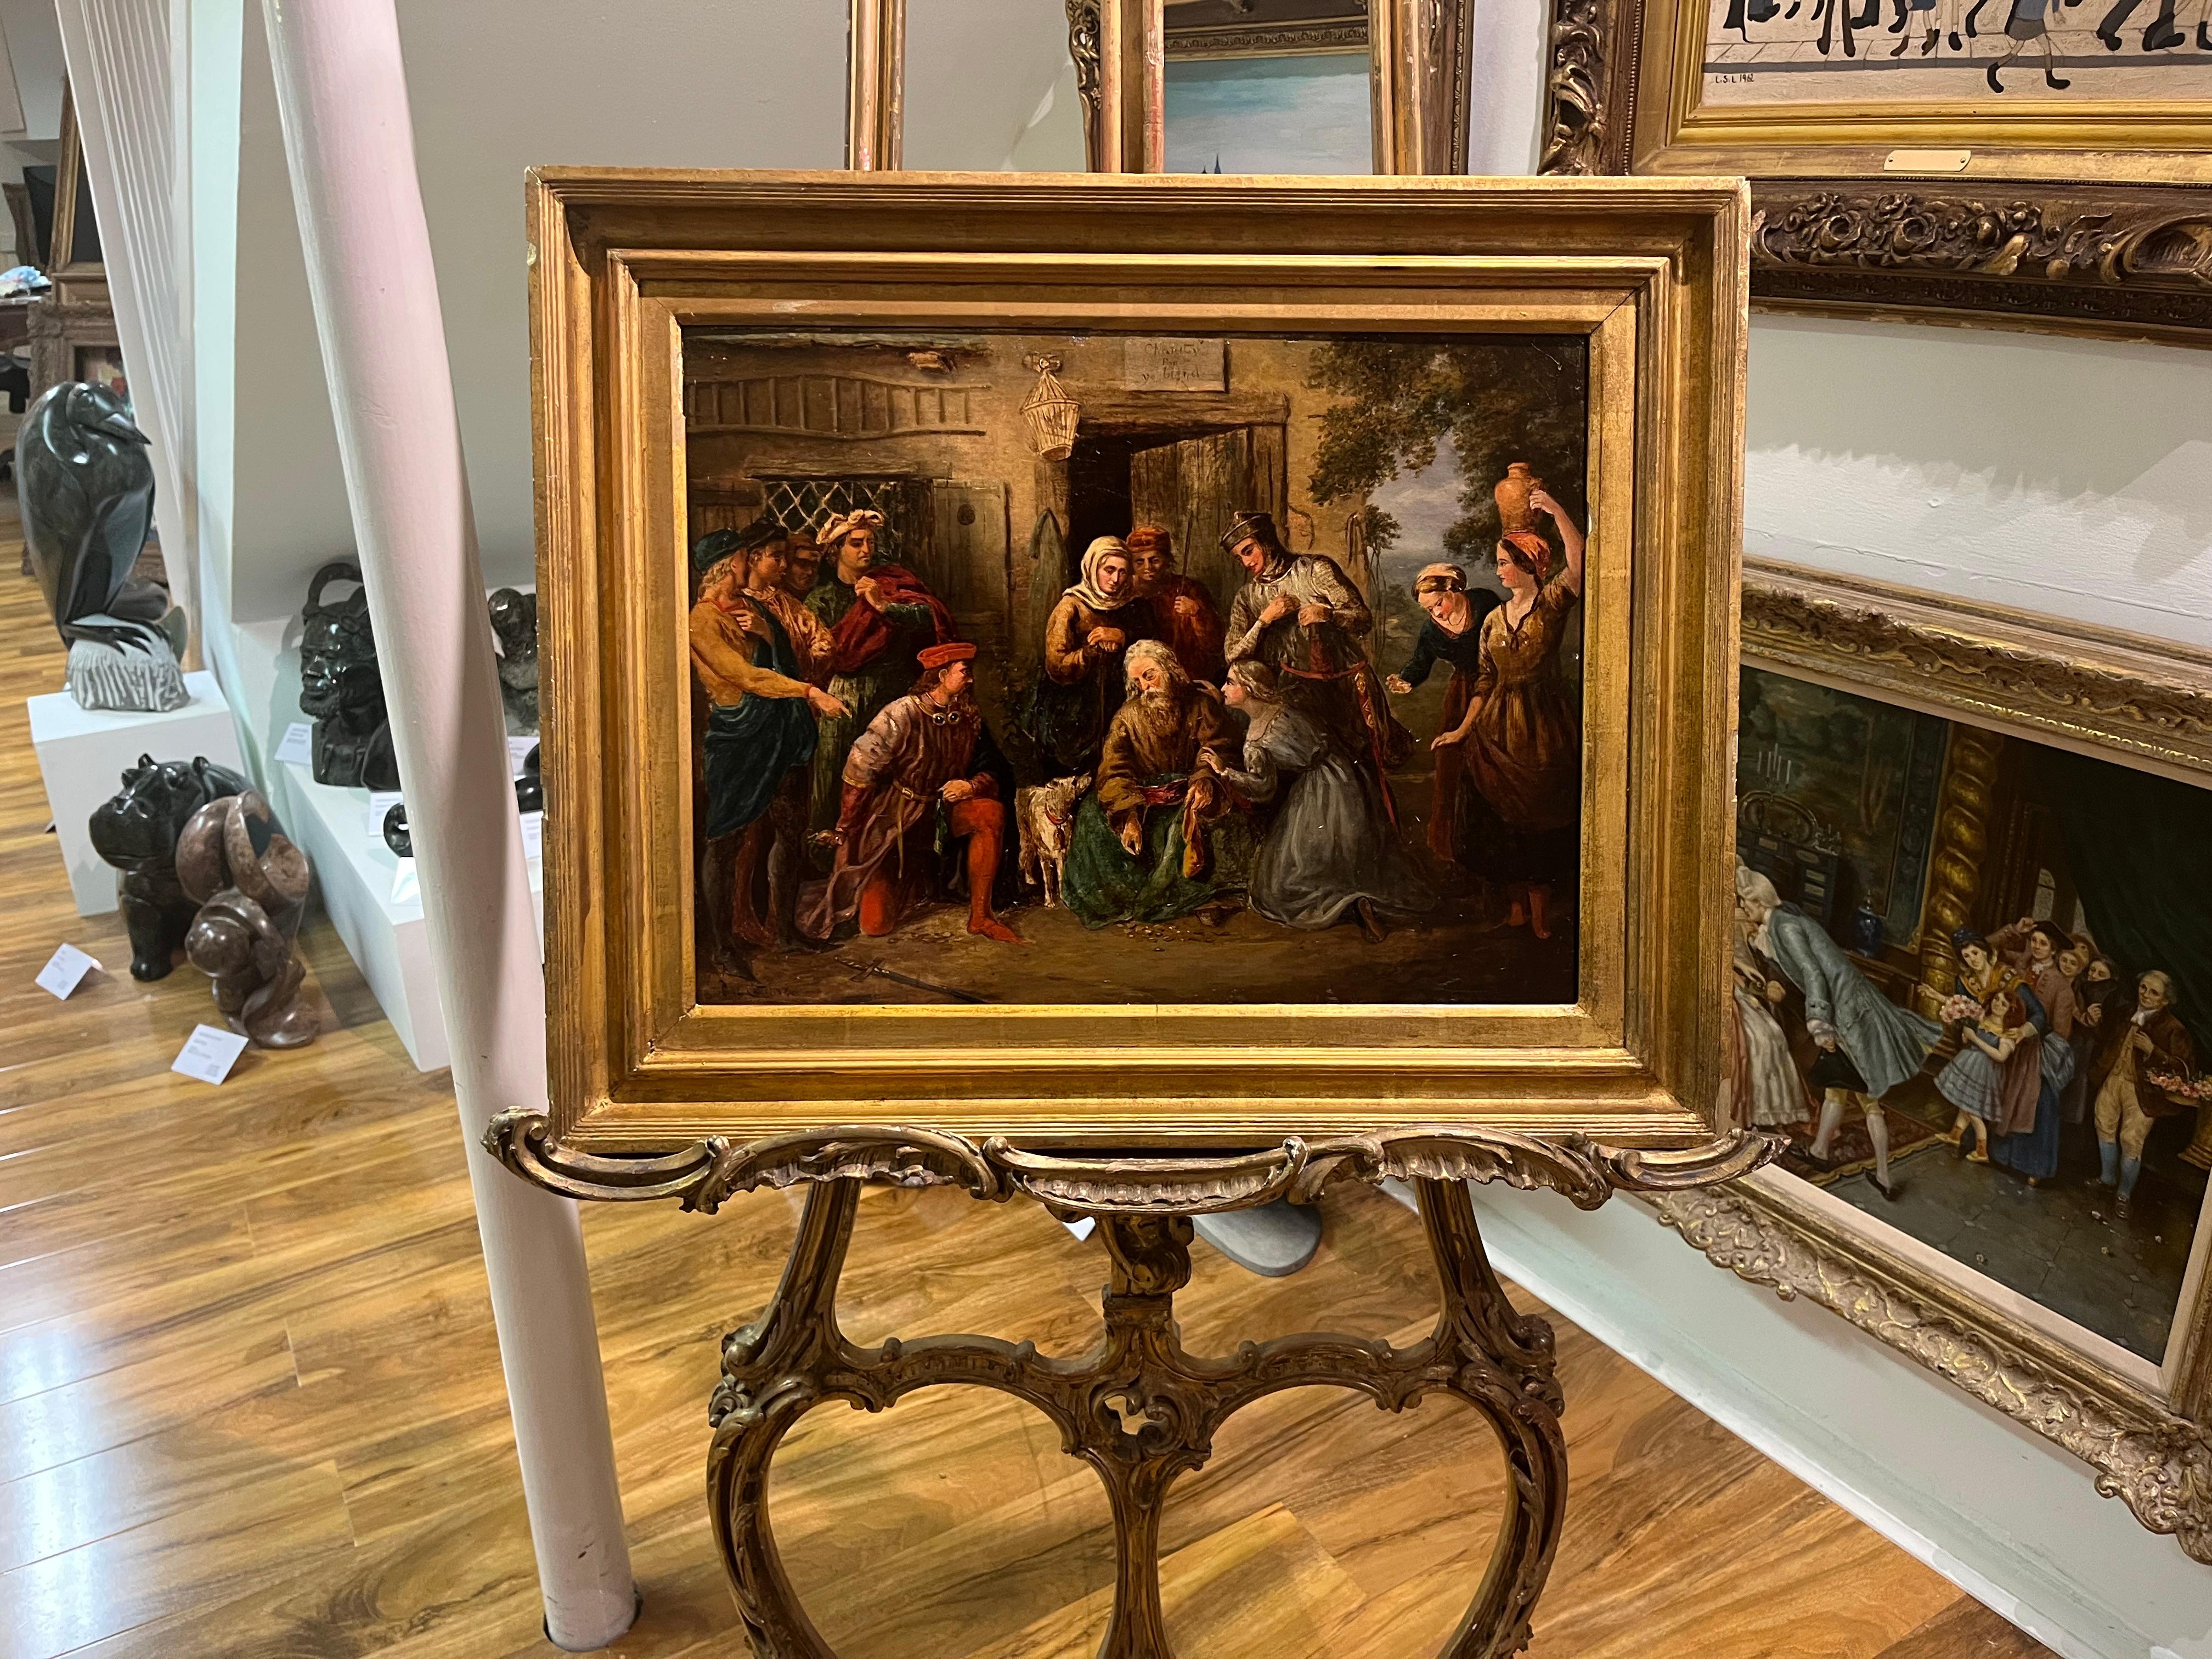 VERY RARE Oil PAINTING Antique 19th Century By Listed artist CHARLES CATTERMOLE (1832-1900)   British old master in Beautiful Gold Gilt Frame
MORE PIECES AT WWW.OLDFINEART.COM
( late 19th century )

Fine Original Antique 19th Century British OLD